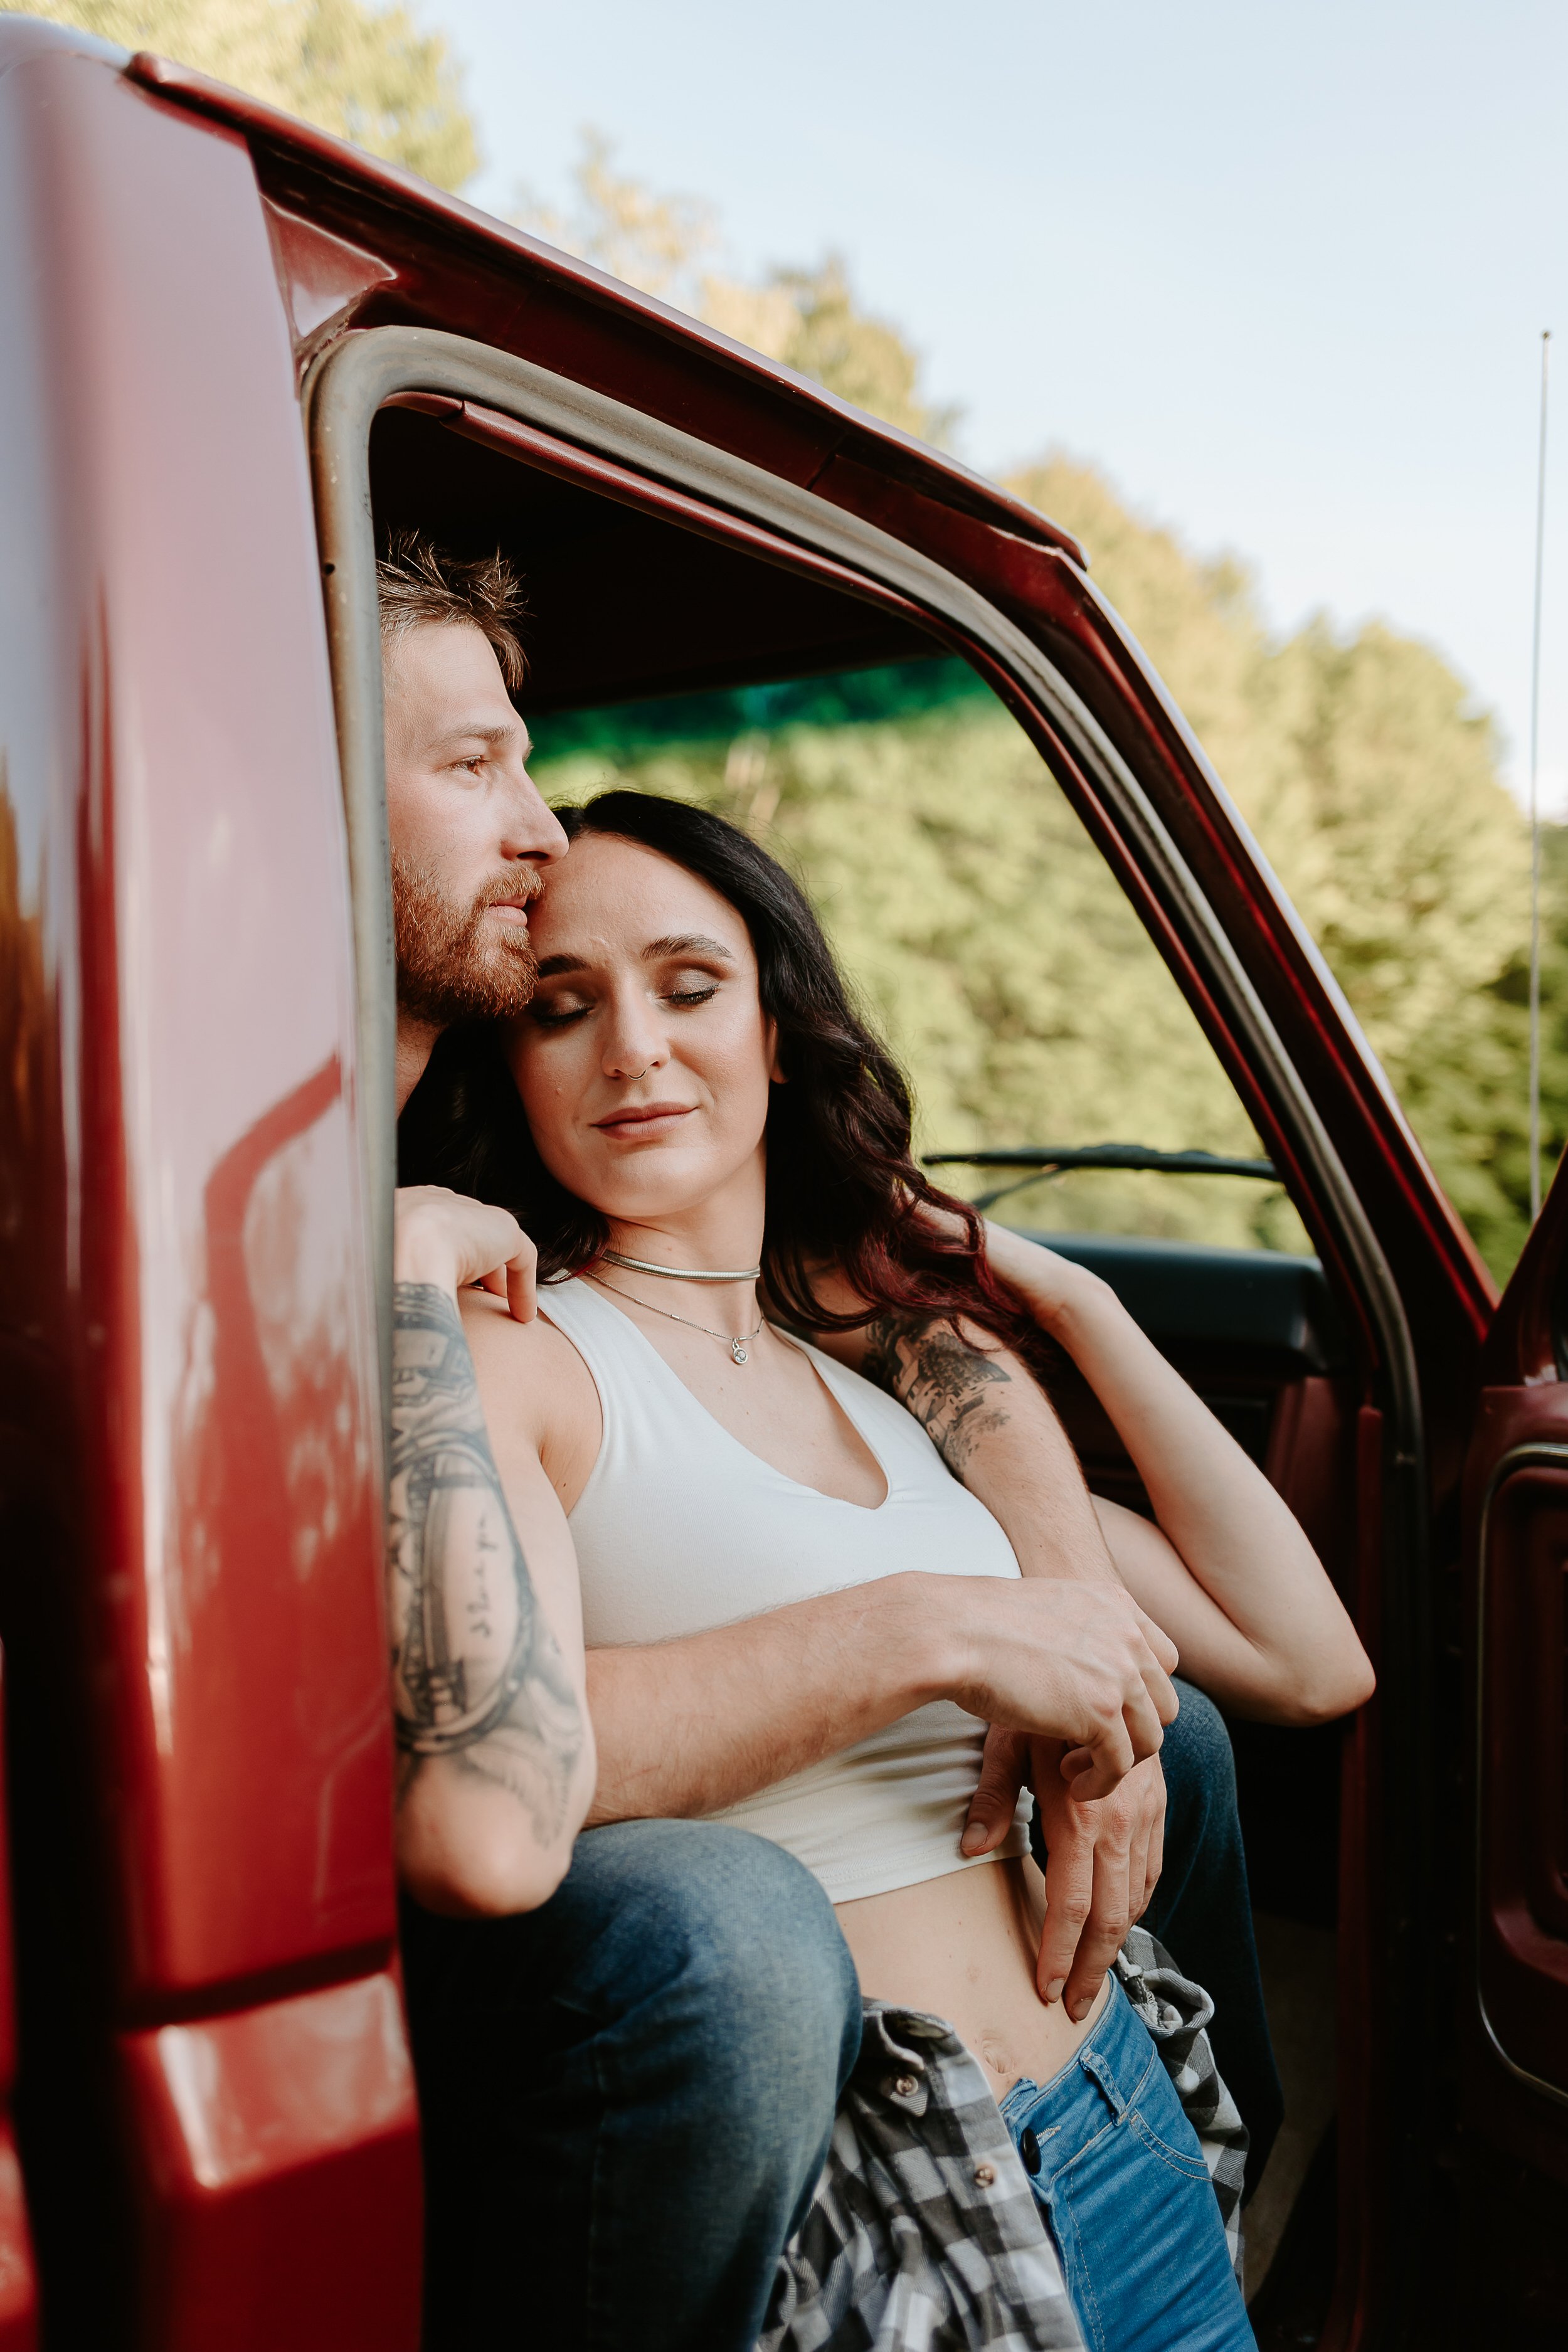 Man holds fiancé while sitting in red truck.